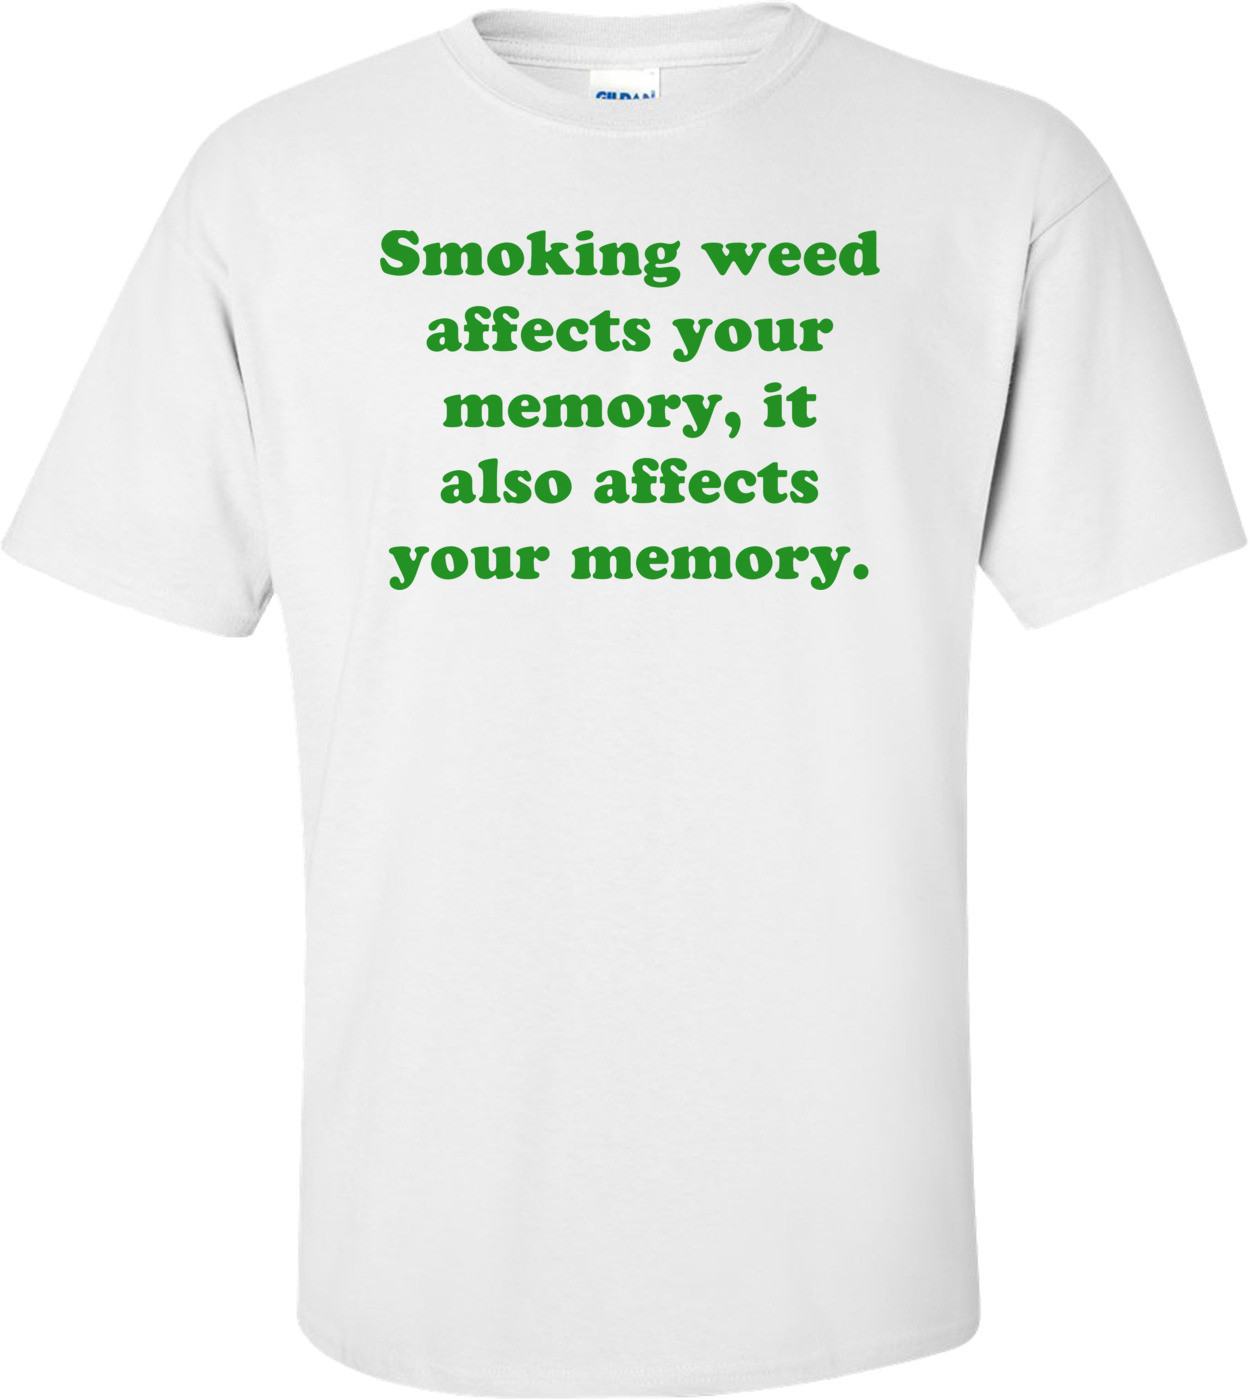 Smoking weed affects your memory, it also affects your memory. Shirt